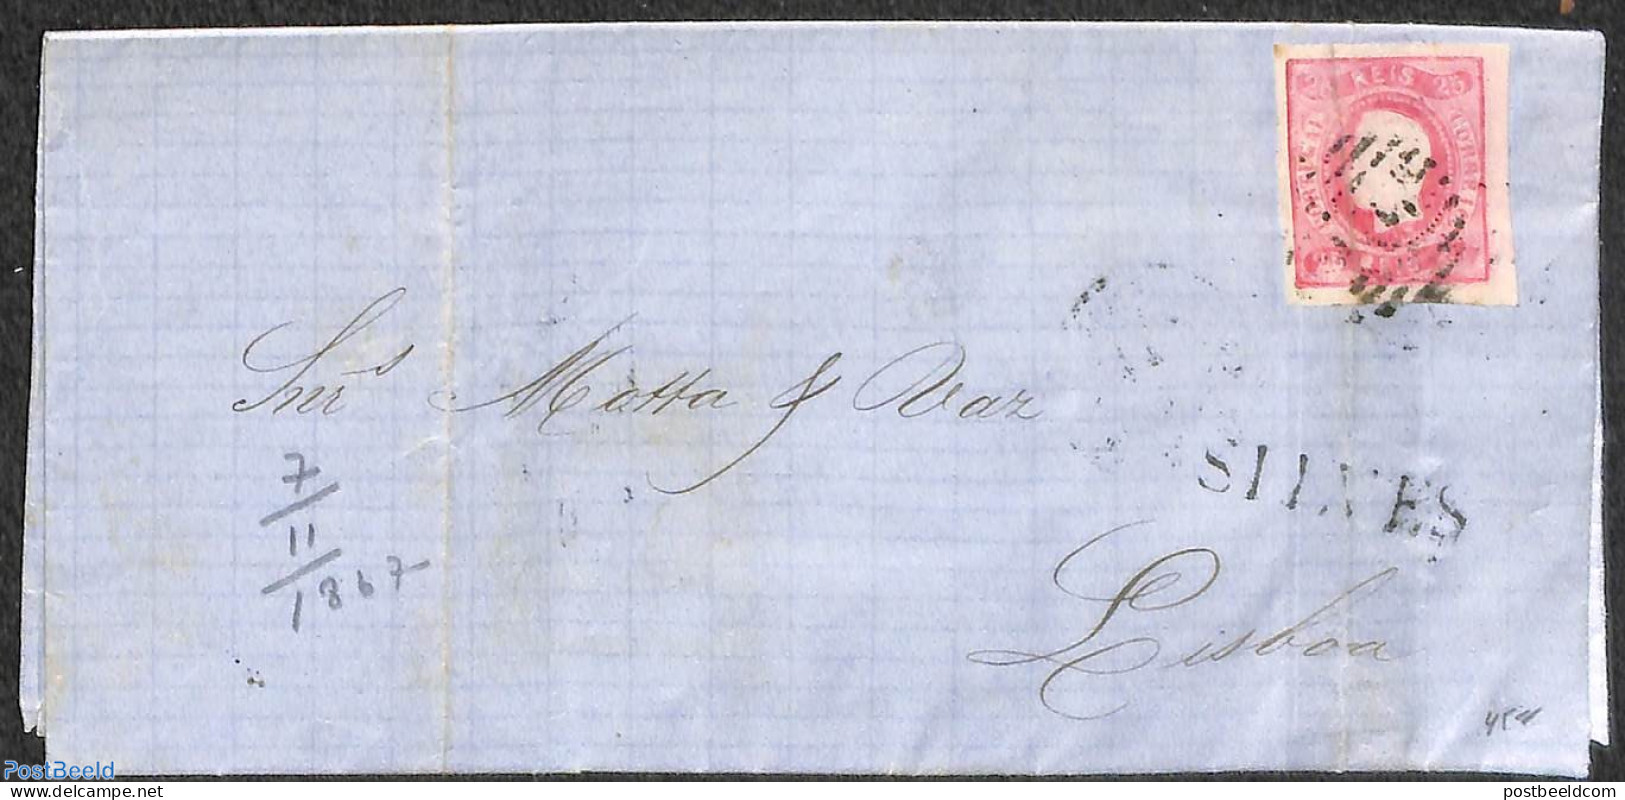 Portugal 1867 Letter From Silves Via Faro To Lisboa, Tear All Over Stamp, Postal History - Lettres & Documents